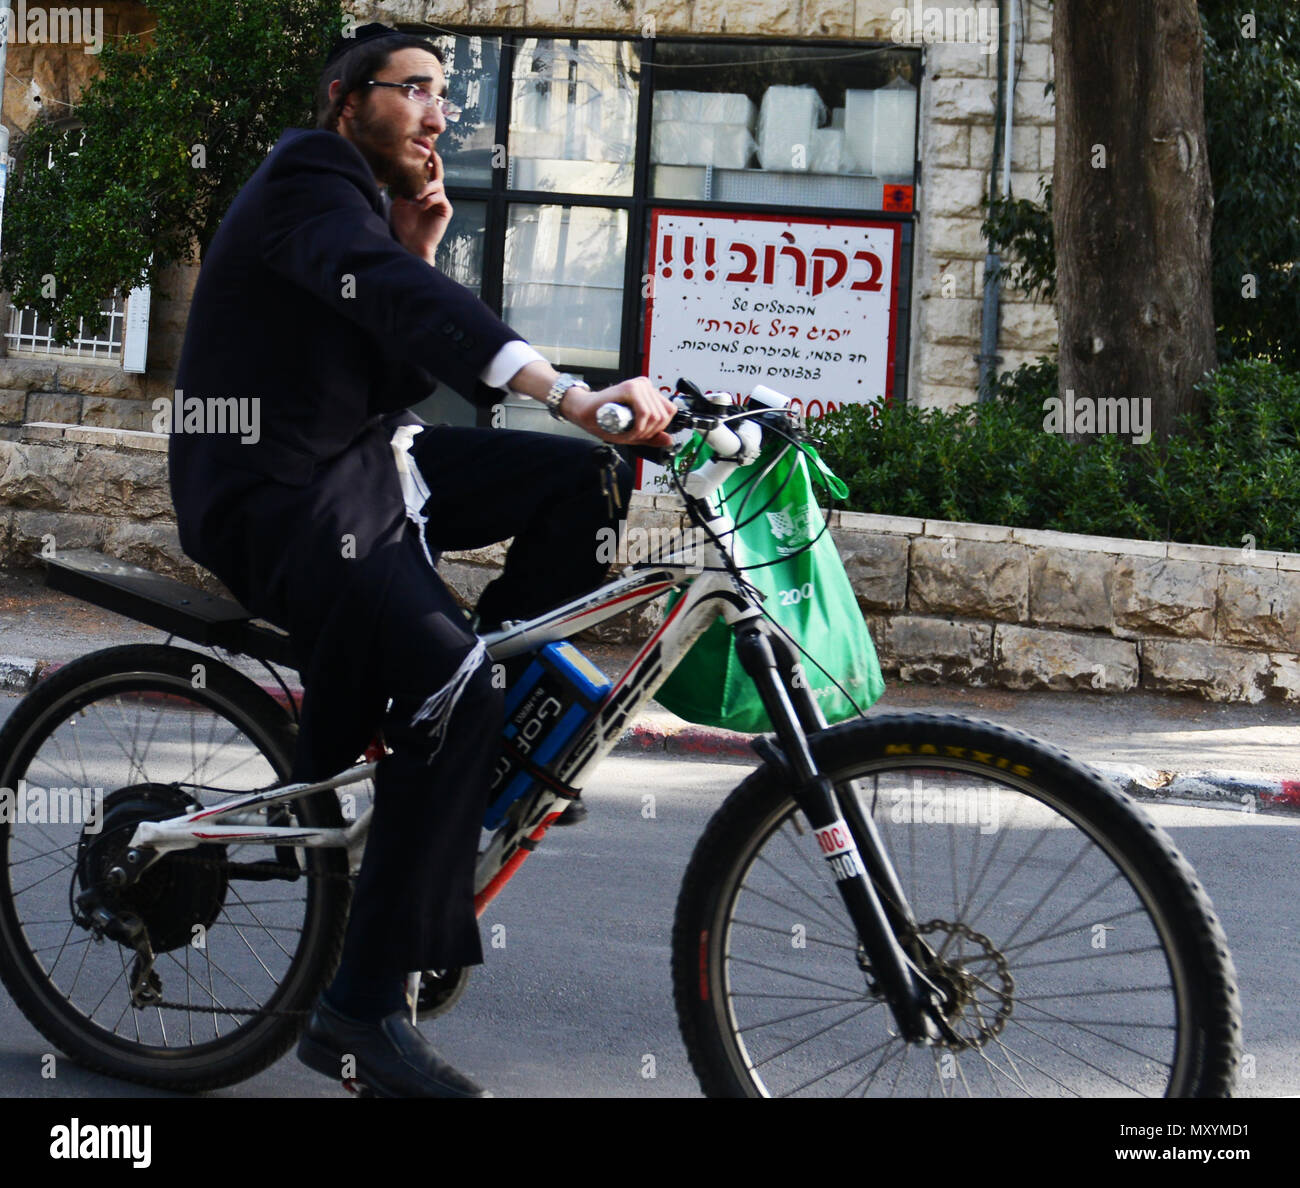 A Hasidic man talking on his mobile phone as he cycles. Stock Photo